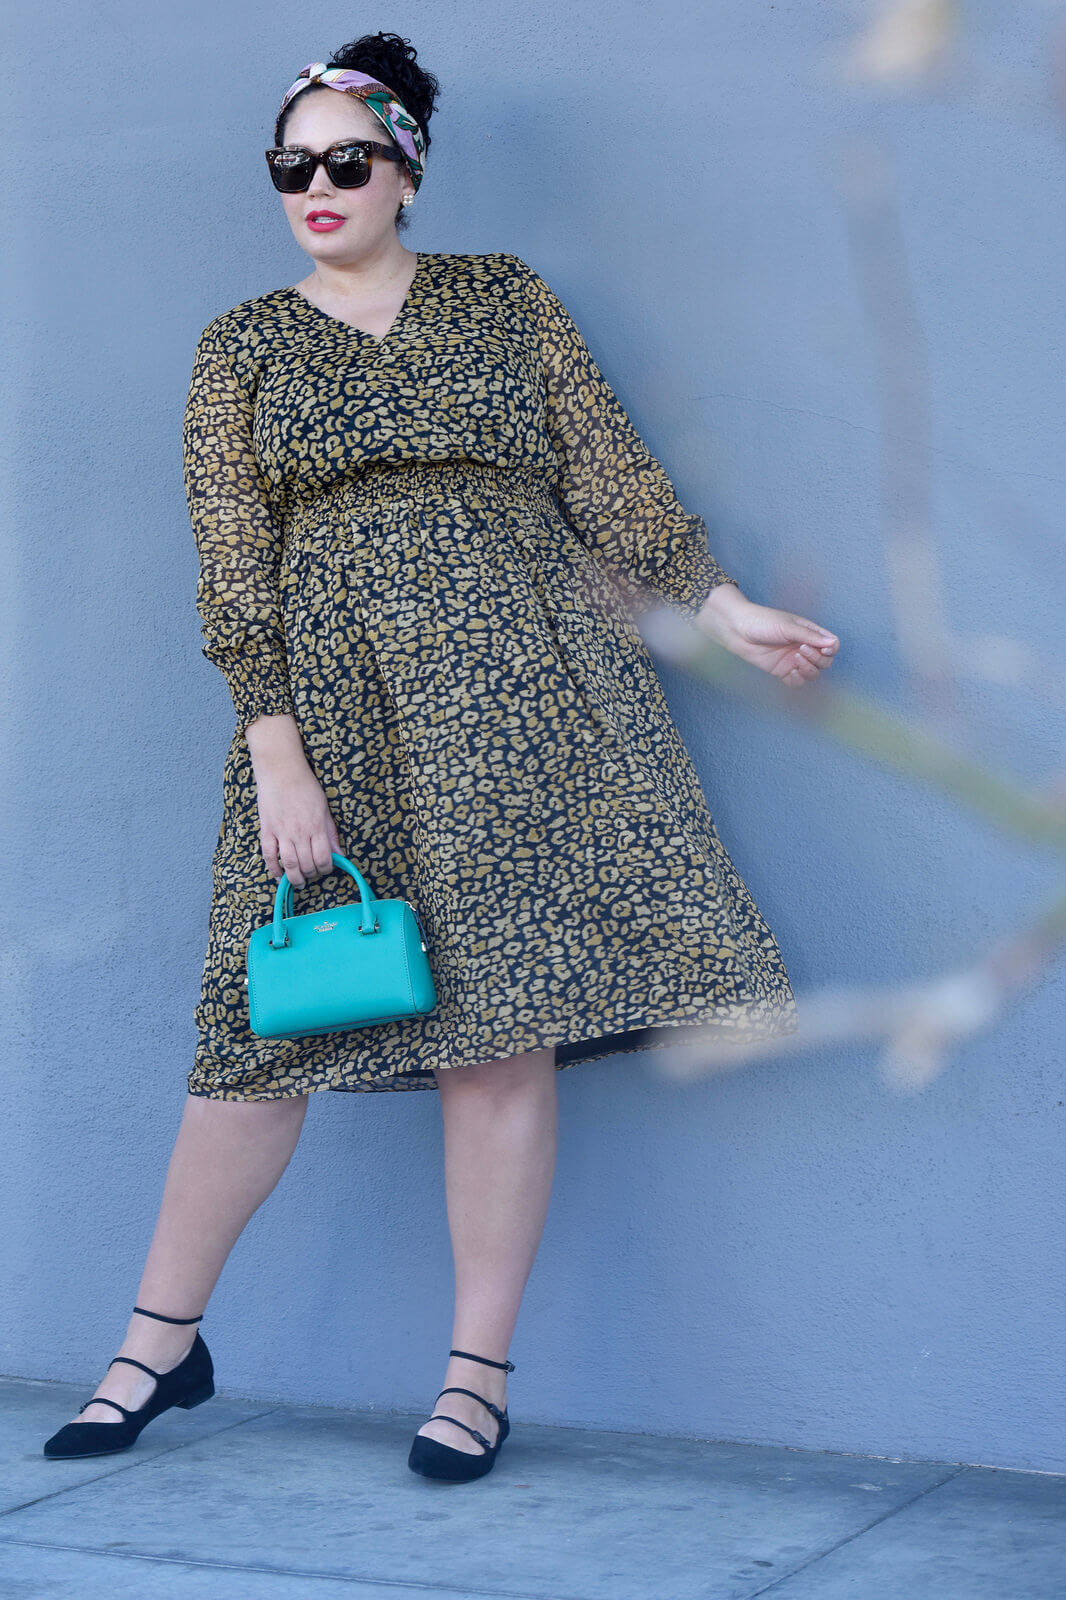 Featuring Leapord Print Long Sleave Dress By Whowhatwear, Bag By Kate Spade, Sunglasses By Celine, Shoes By Stuart Weitzman And A Headband via @GirlWithCurves